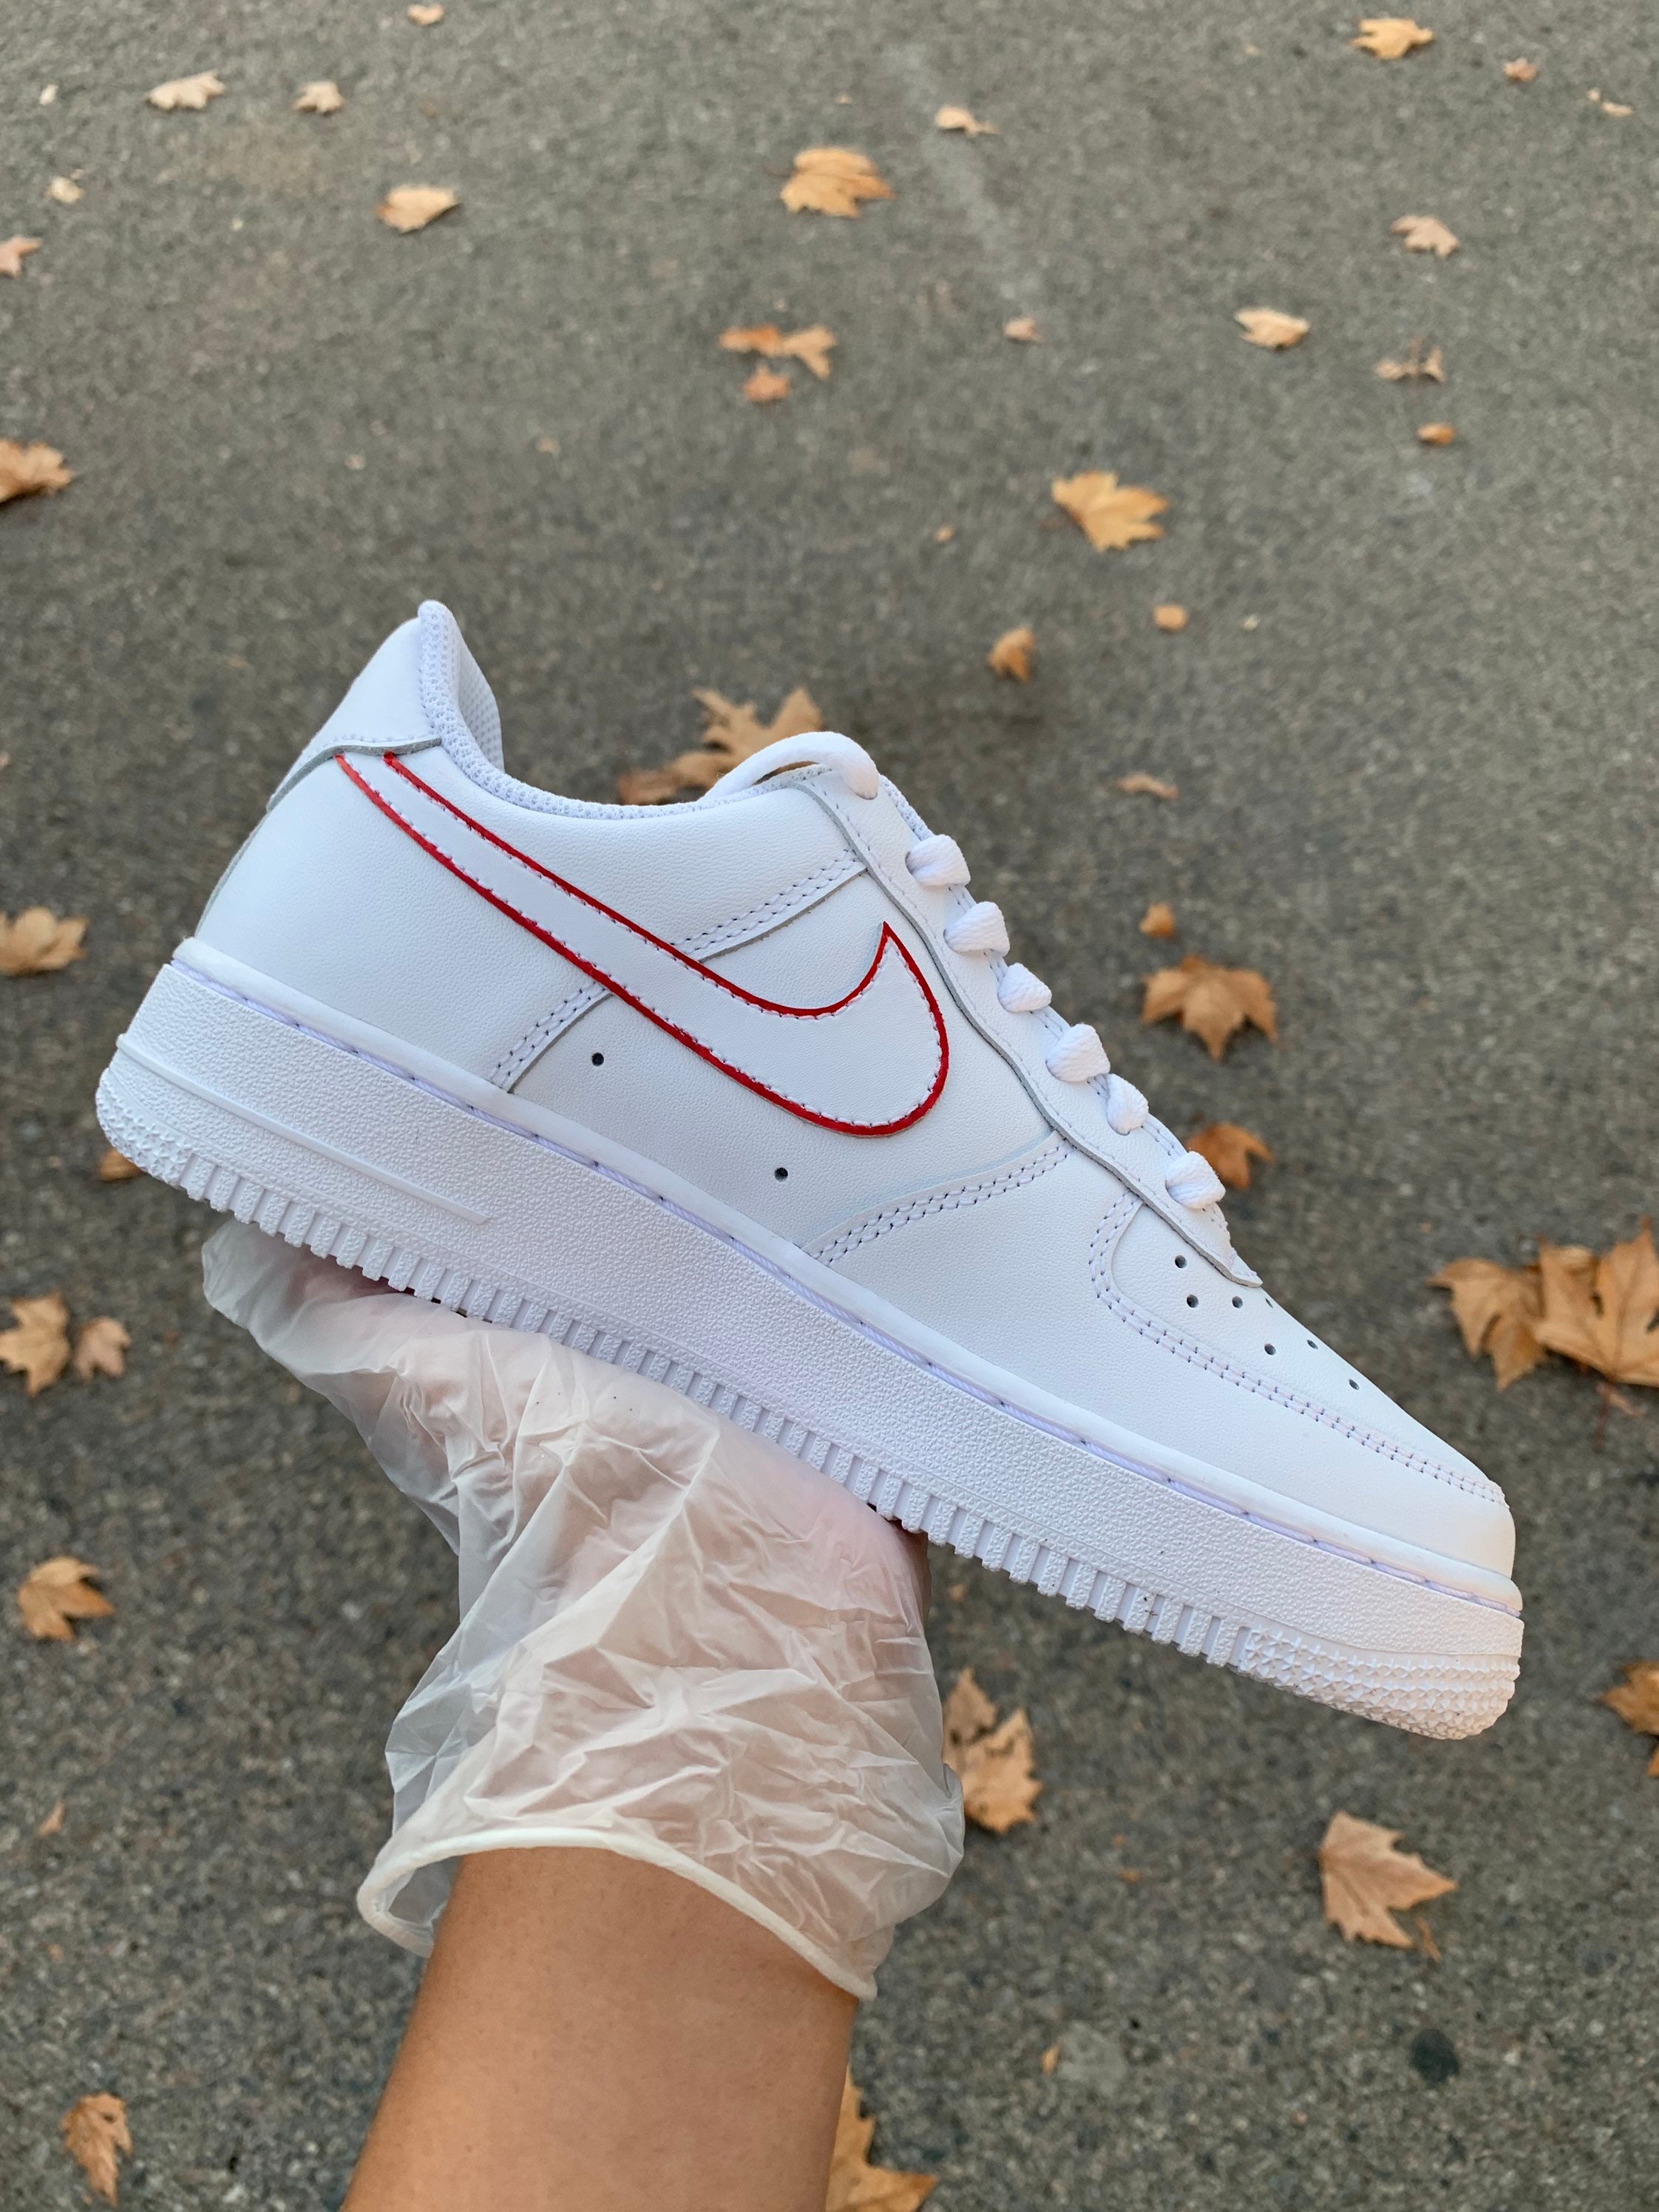 unlock helikopter Tilsyneladende Red Outlined Nike Air Force 1red & White Nike Air Force One - Etsy